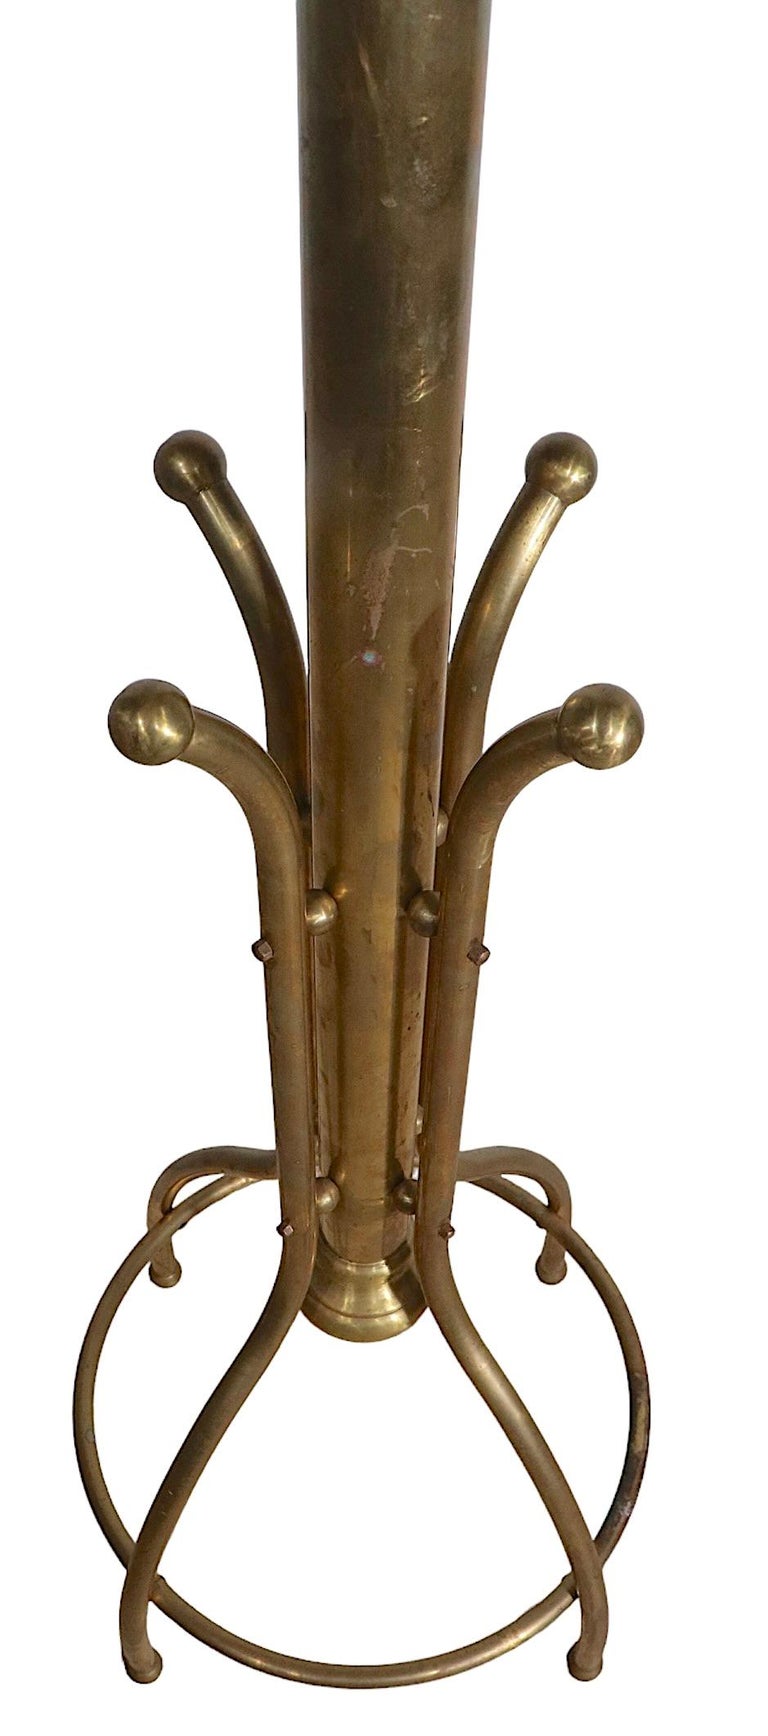 20th Century Vintage Brass Coat Tree Rack Stand Made in USA